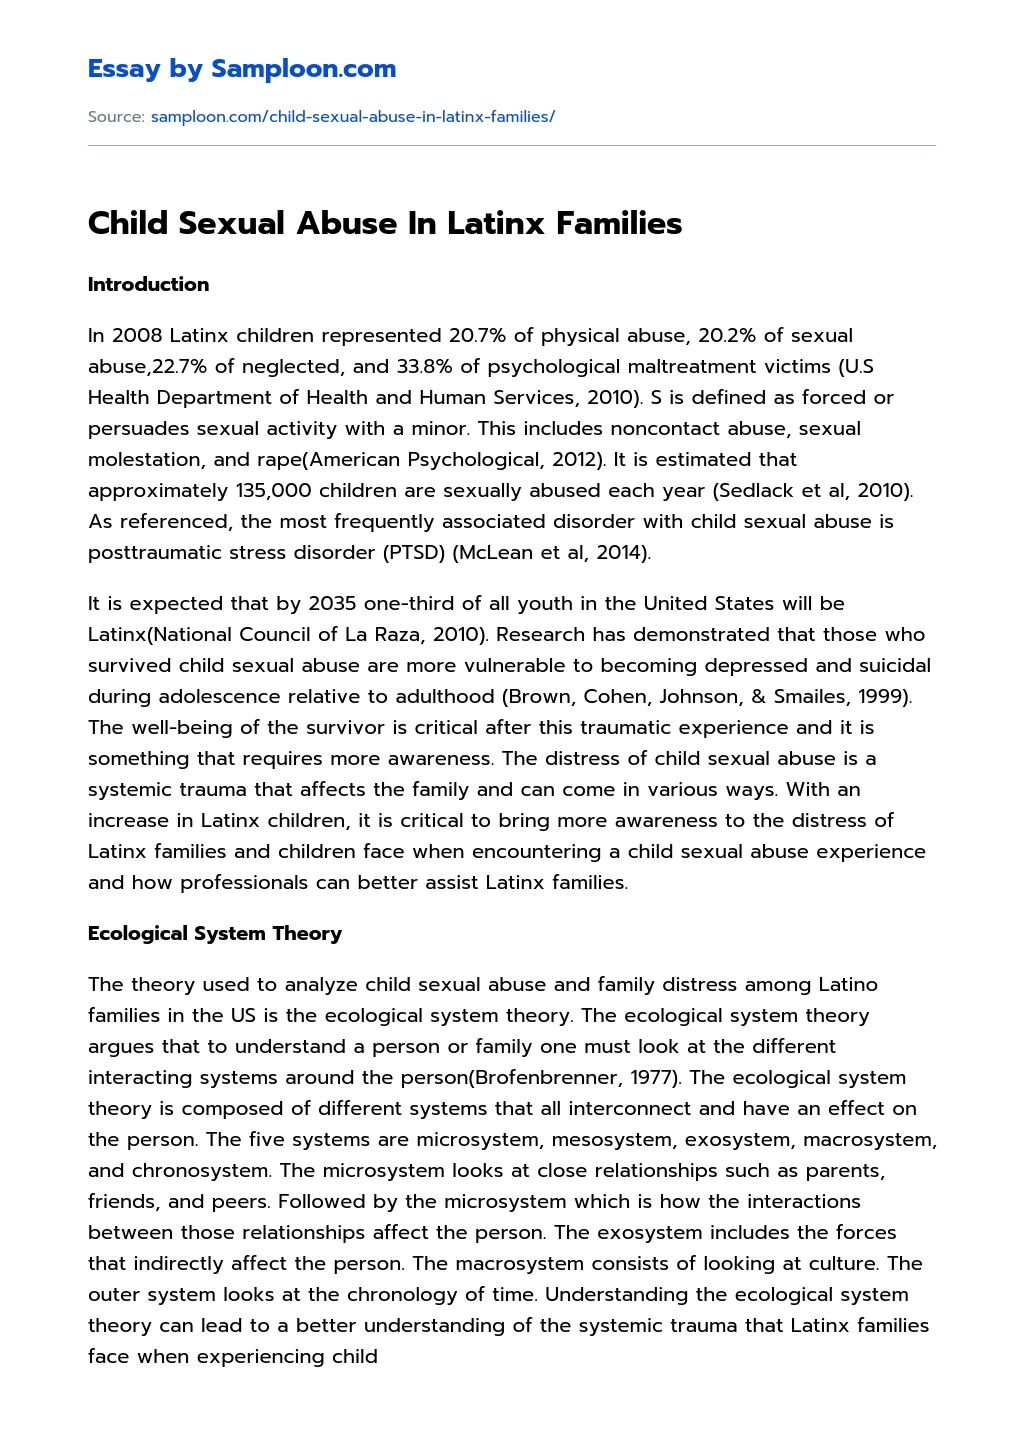 Child Sexual Abuse In Latinx Families essay